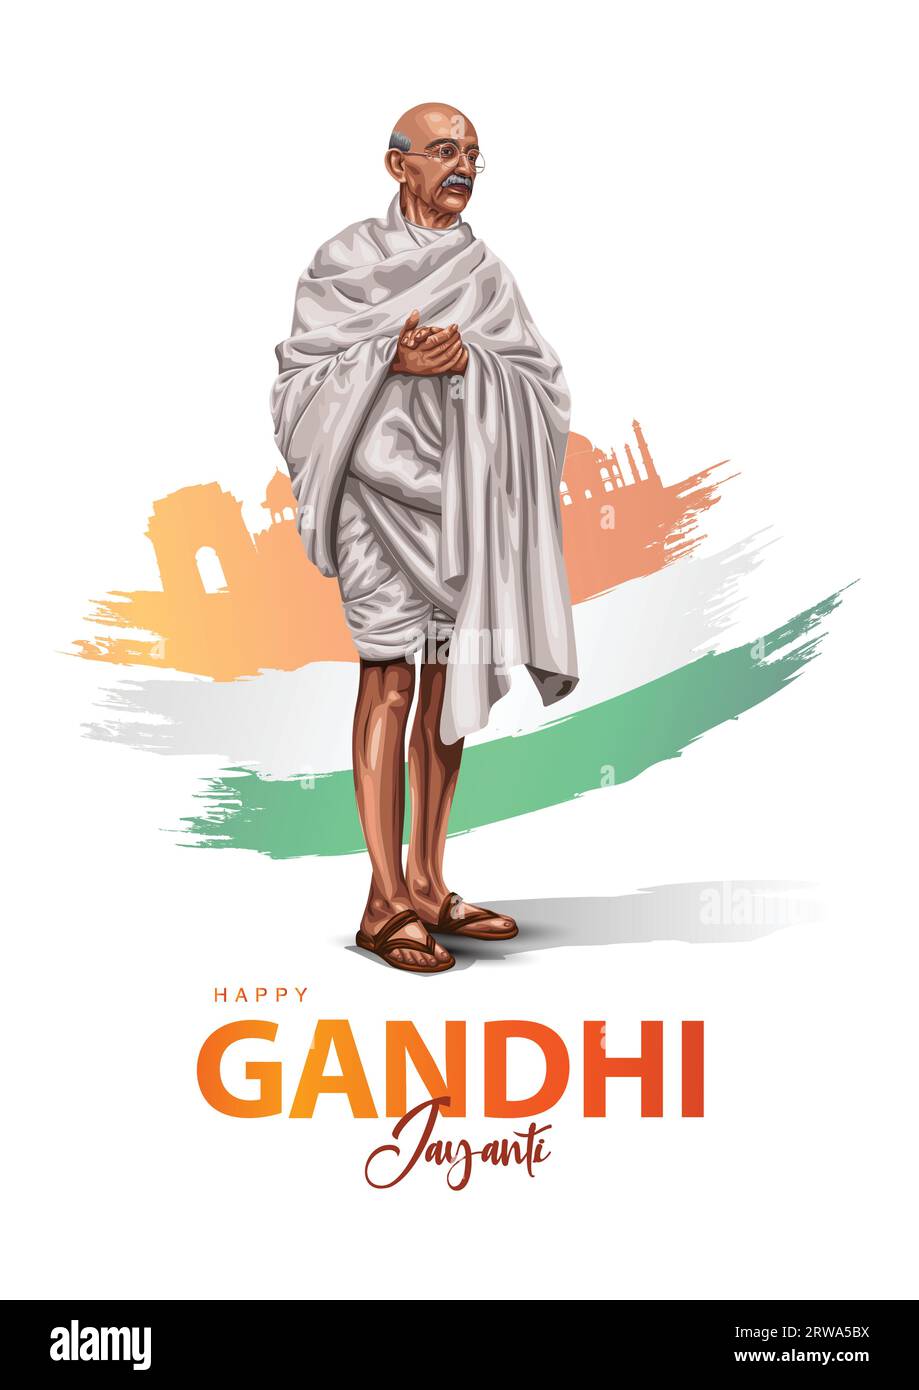 2nd October Happy gandhi jayanti. indian Freedom Fighter Mahatma Gandhi he is known as Bapu. abstract vector illustration design Stock Vector